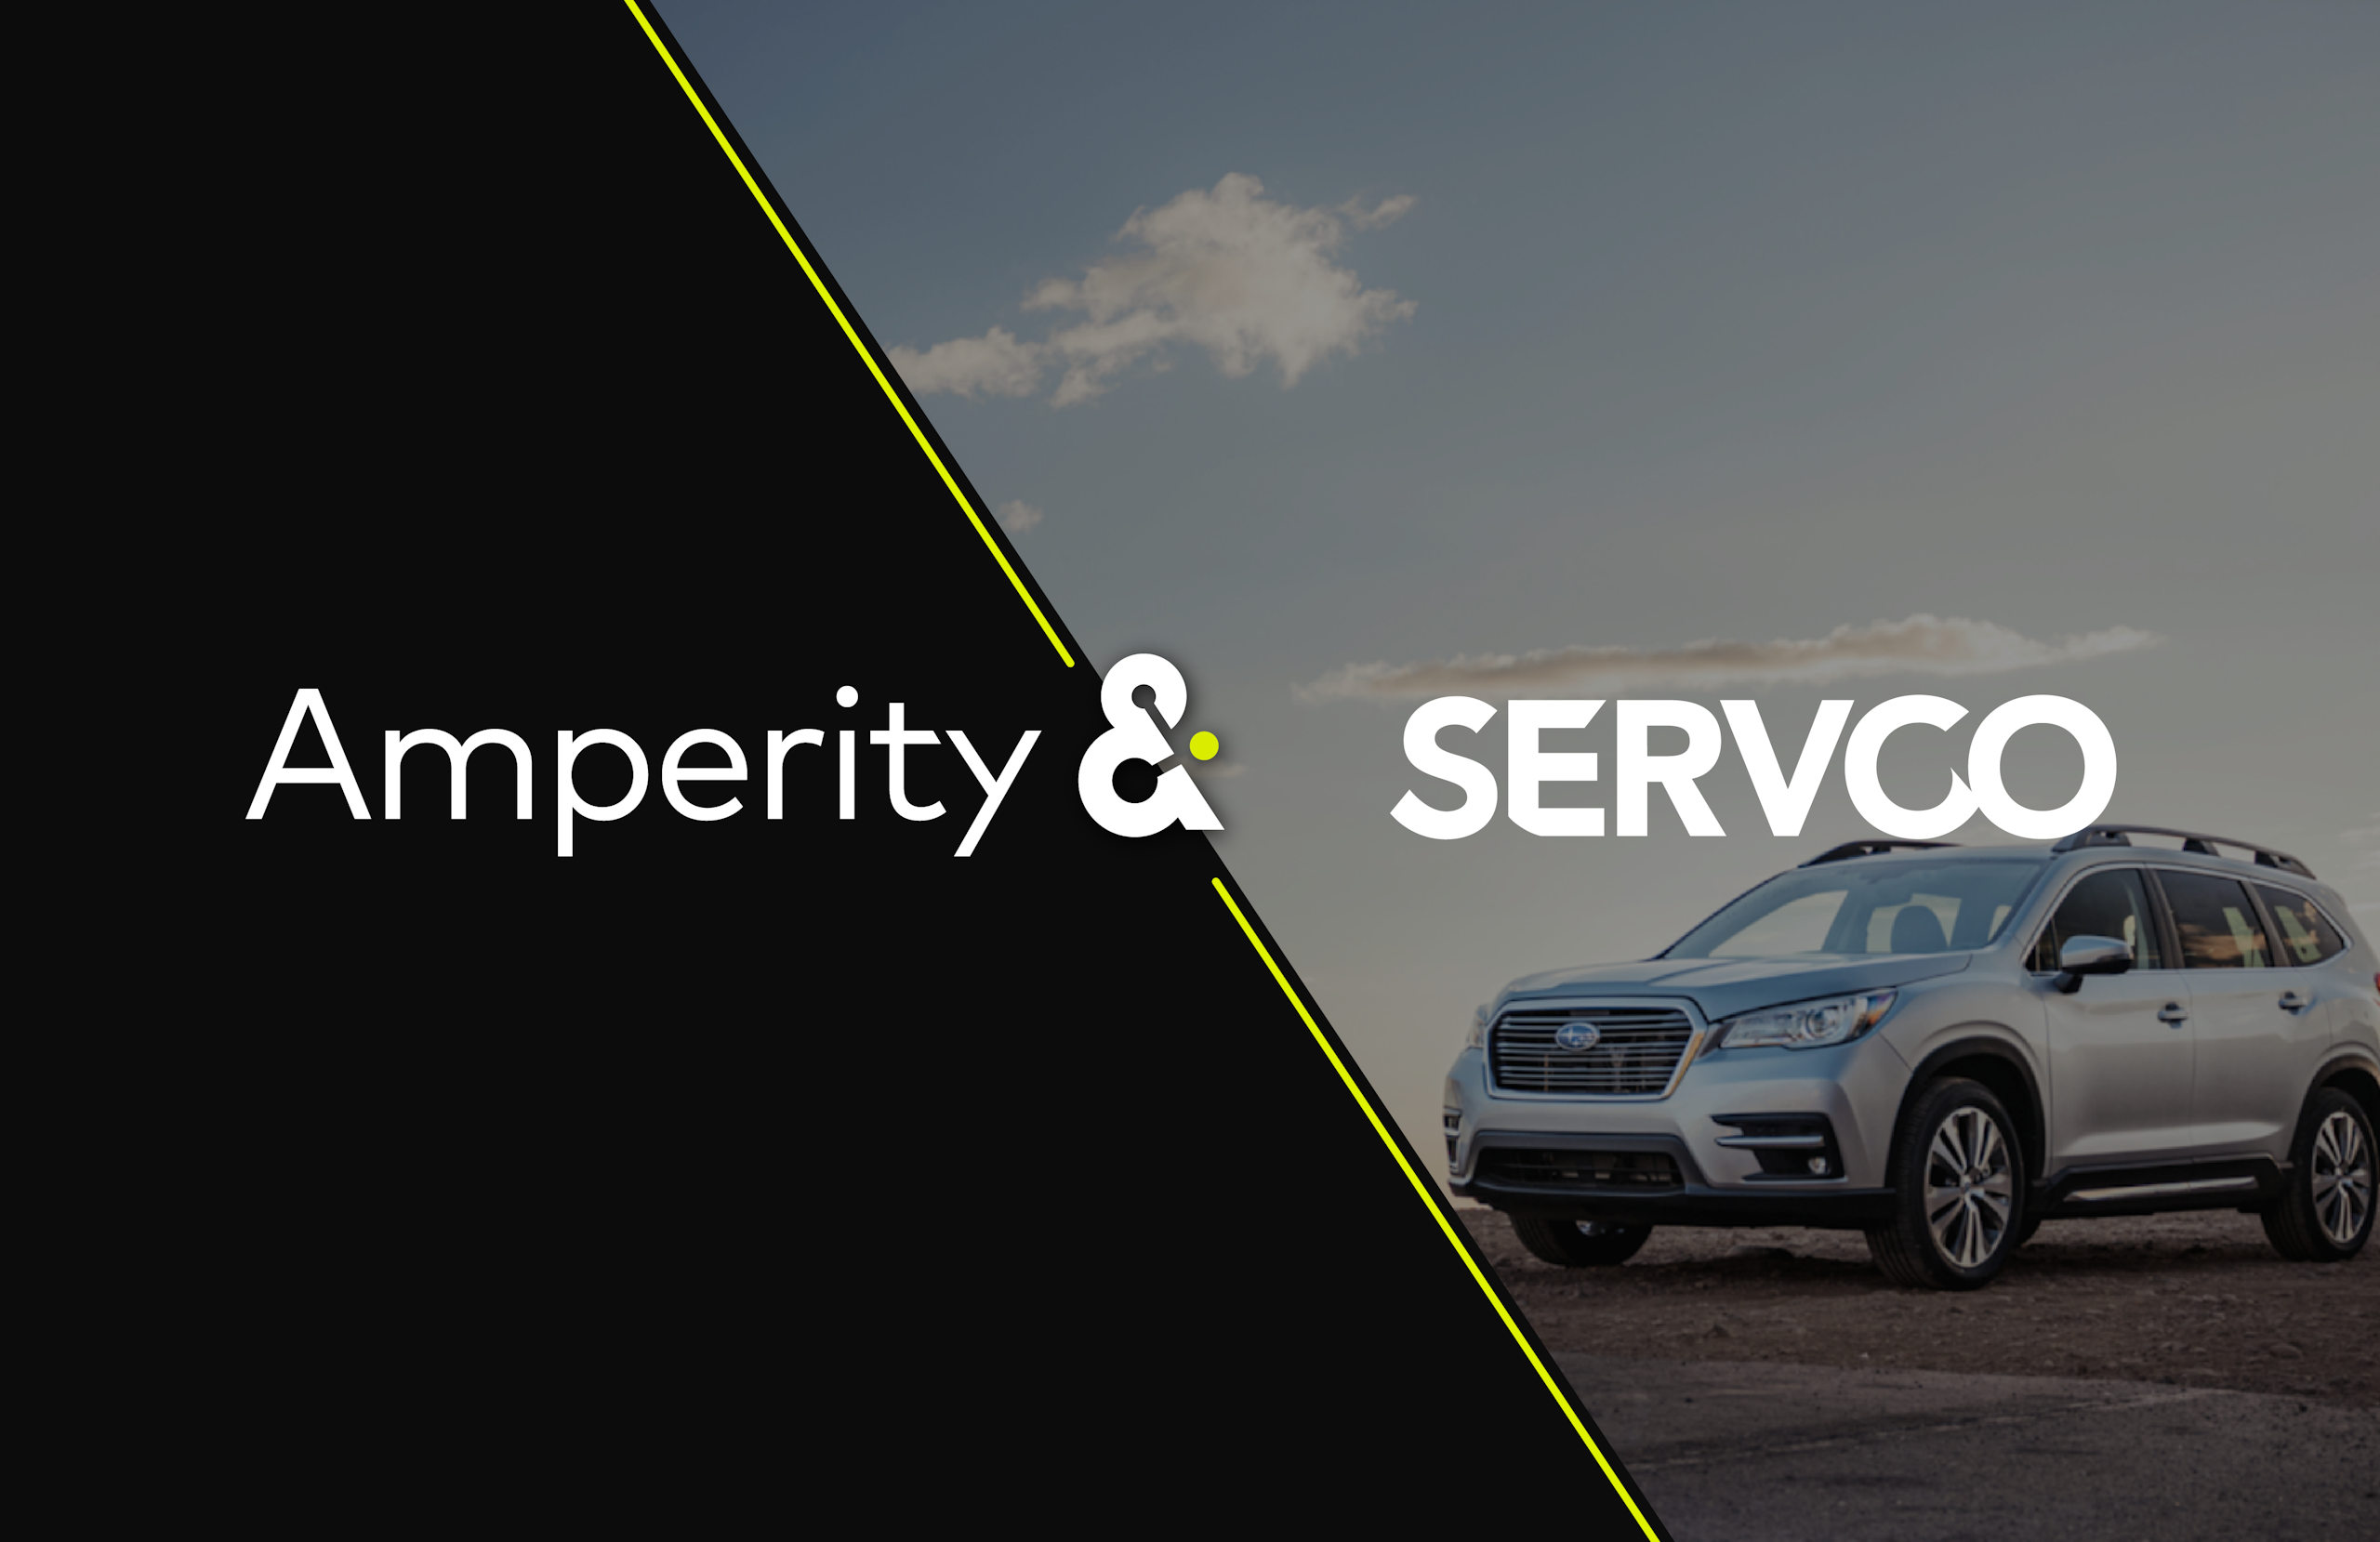 Image of car displaying: Amperity & SERVCO. 